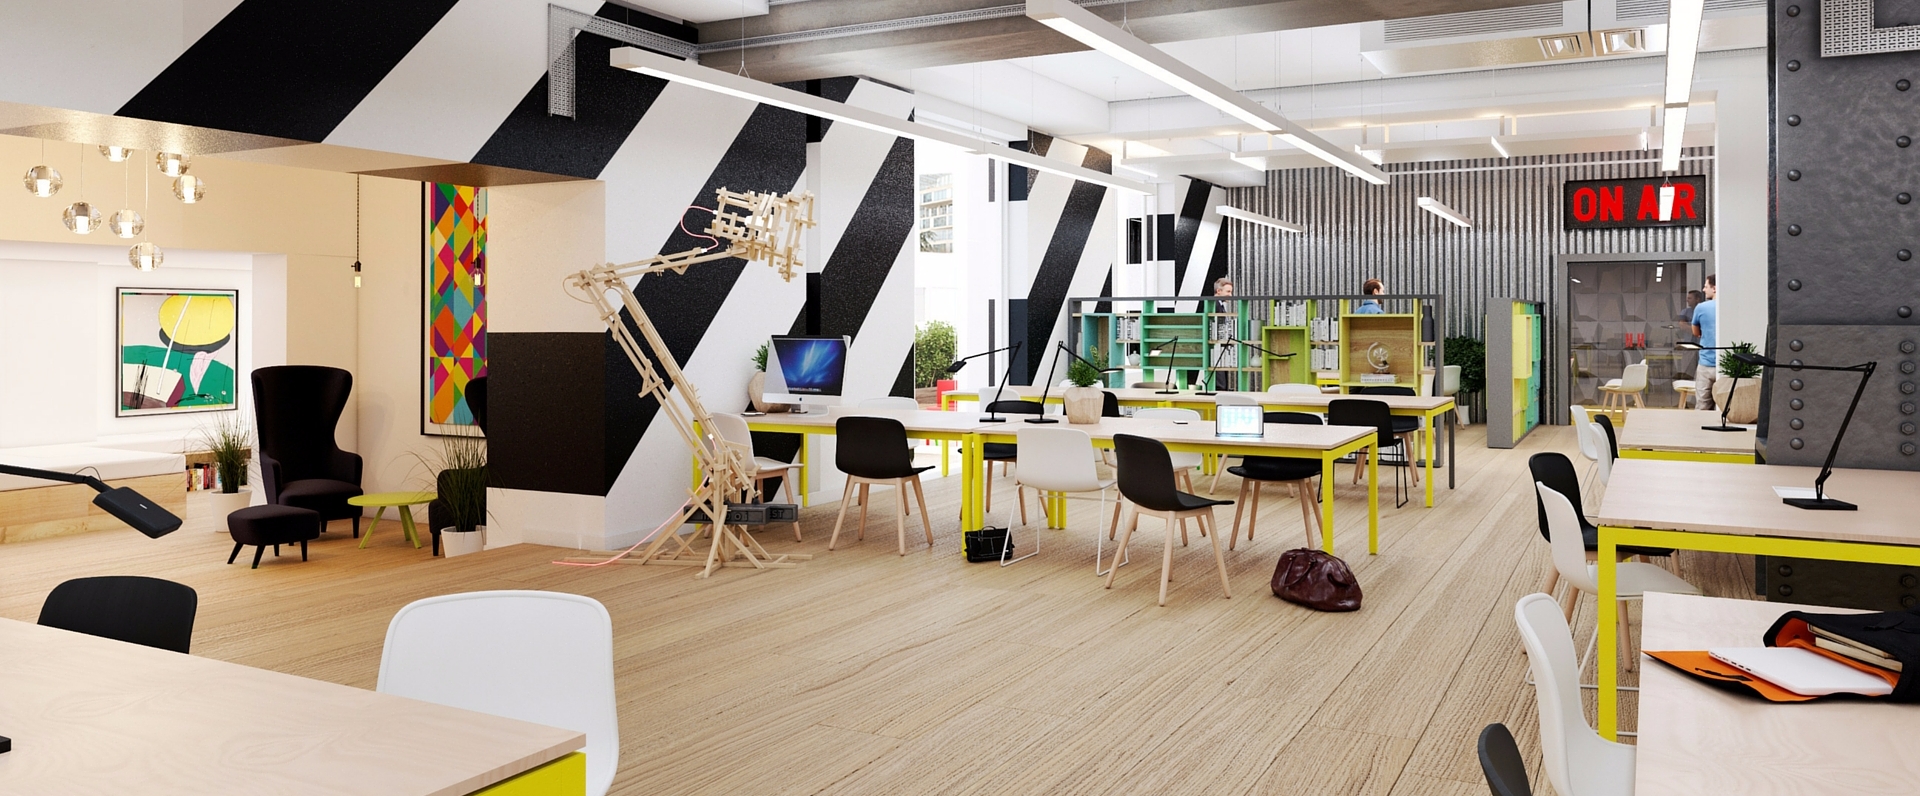 london coworking huckletree shoreditch